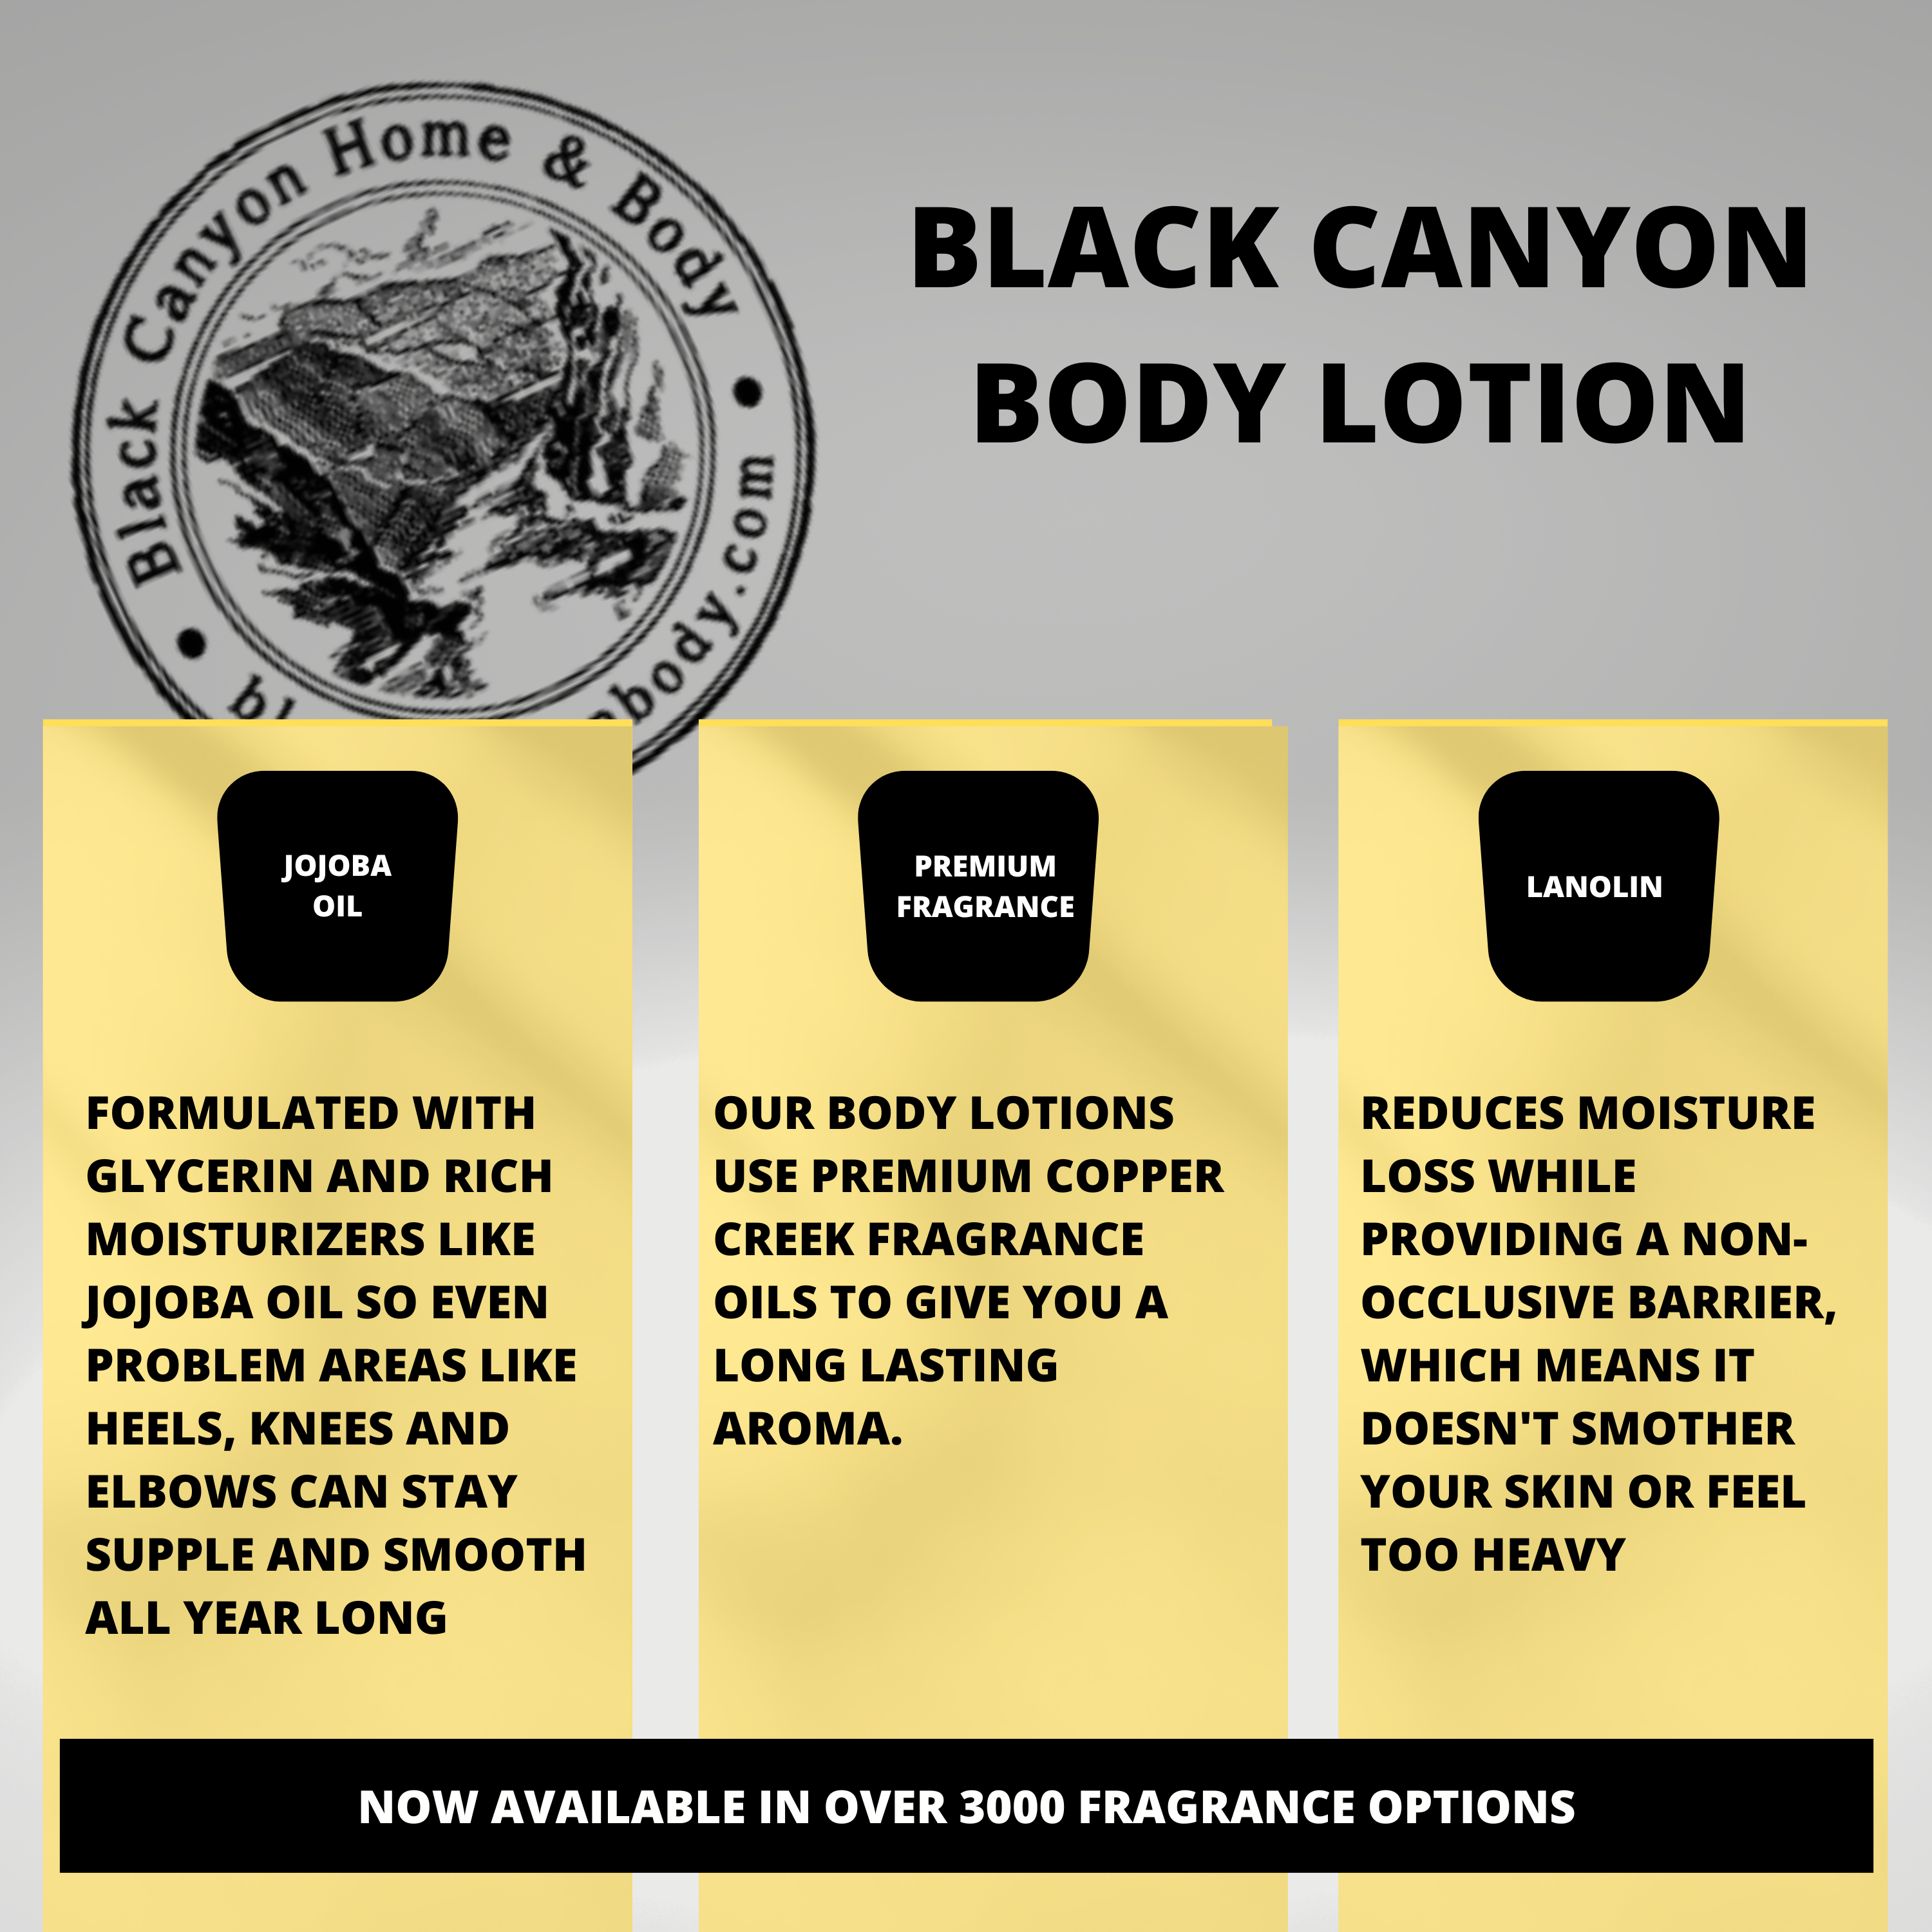 Black Canyon Dulce De Leche Scented Luxury Body Lotion with Lanolin and Jojoba Oil